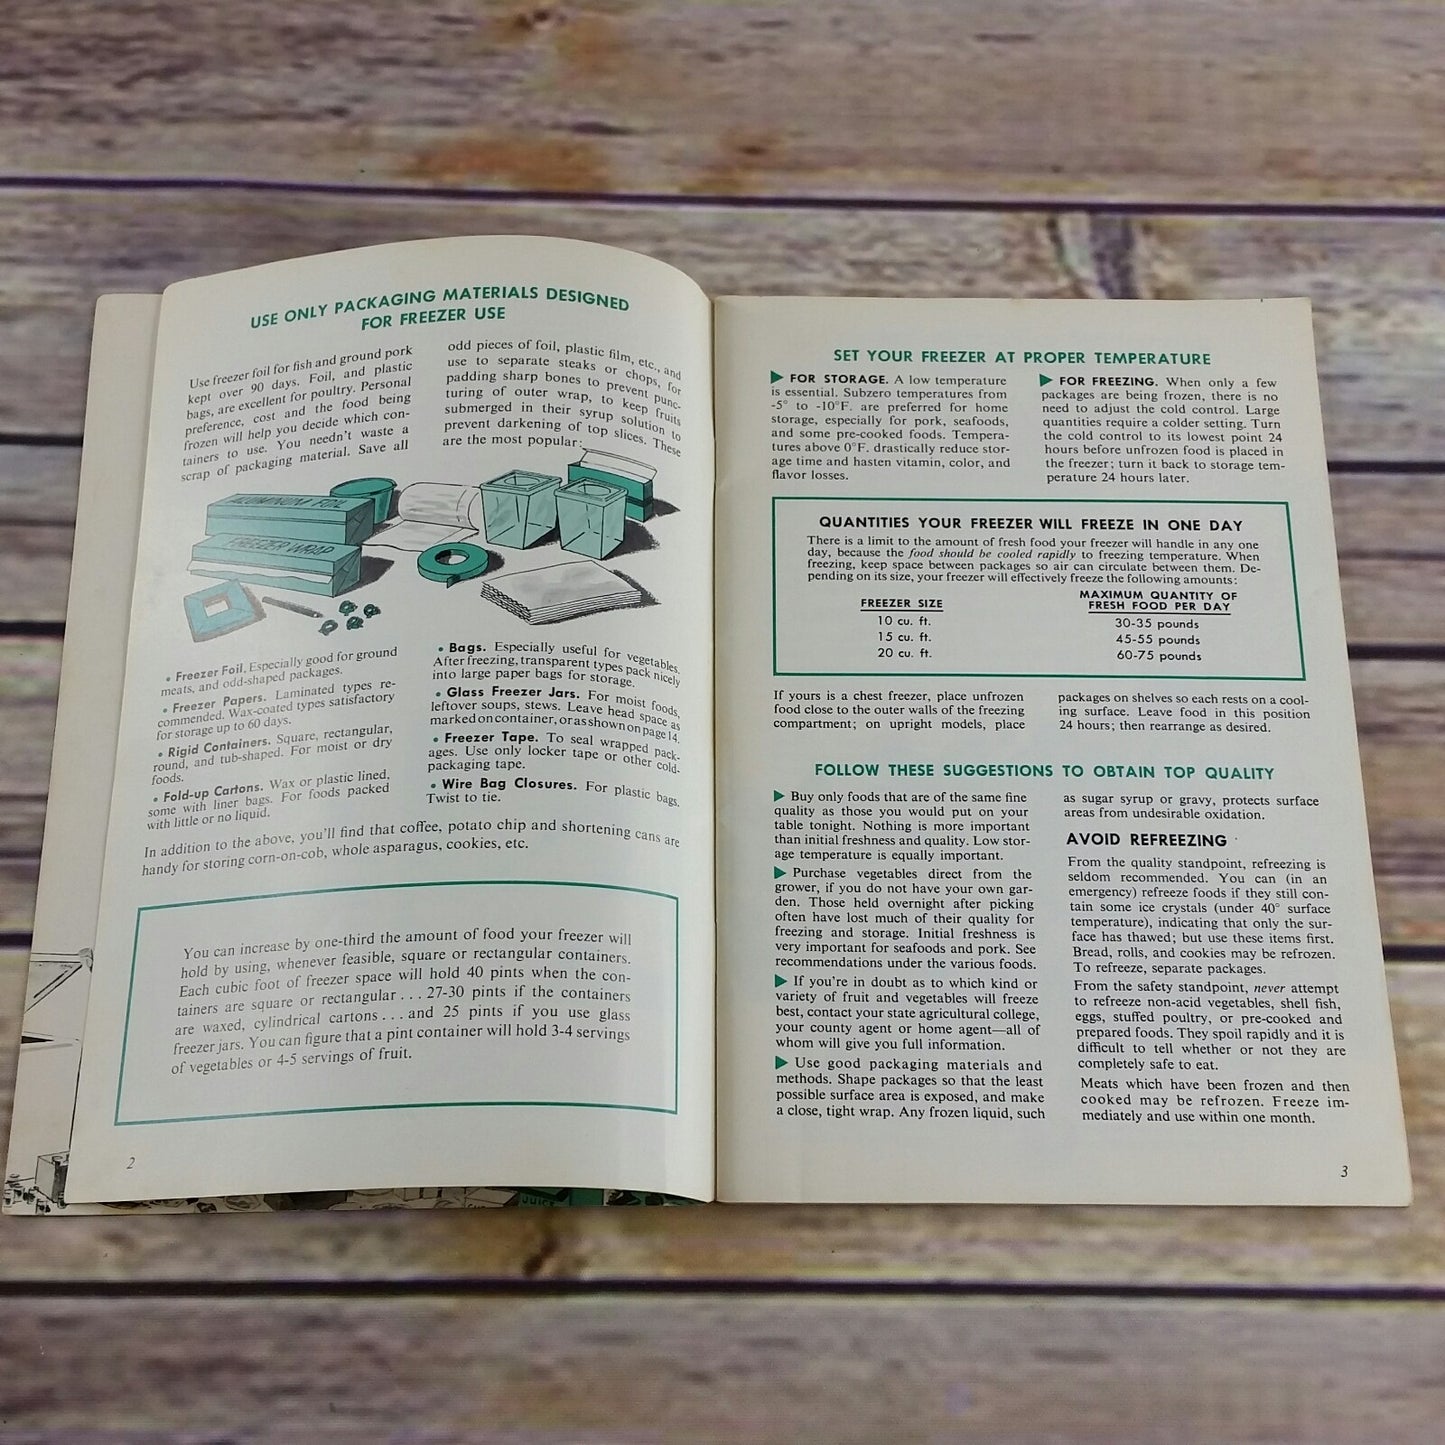 Vintage Cookbook How to Freeze Foods 1950s 1960s Recipes Paperback Booklet James Winter Frozen Food Research Minnesota - At Grandma's Table